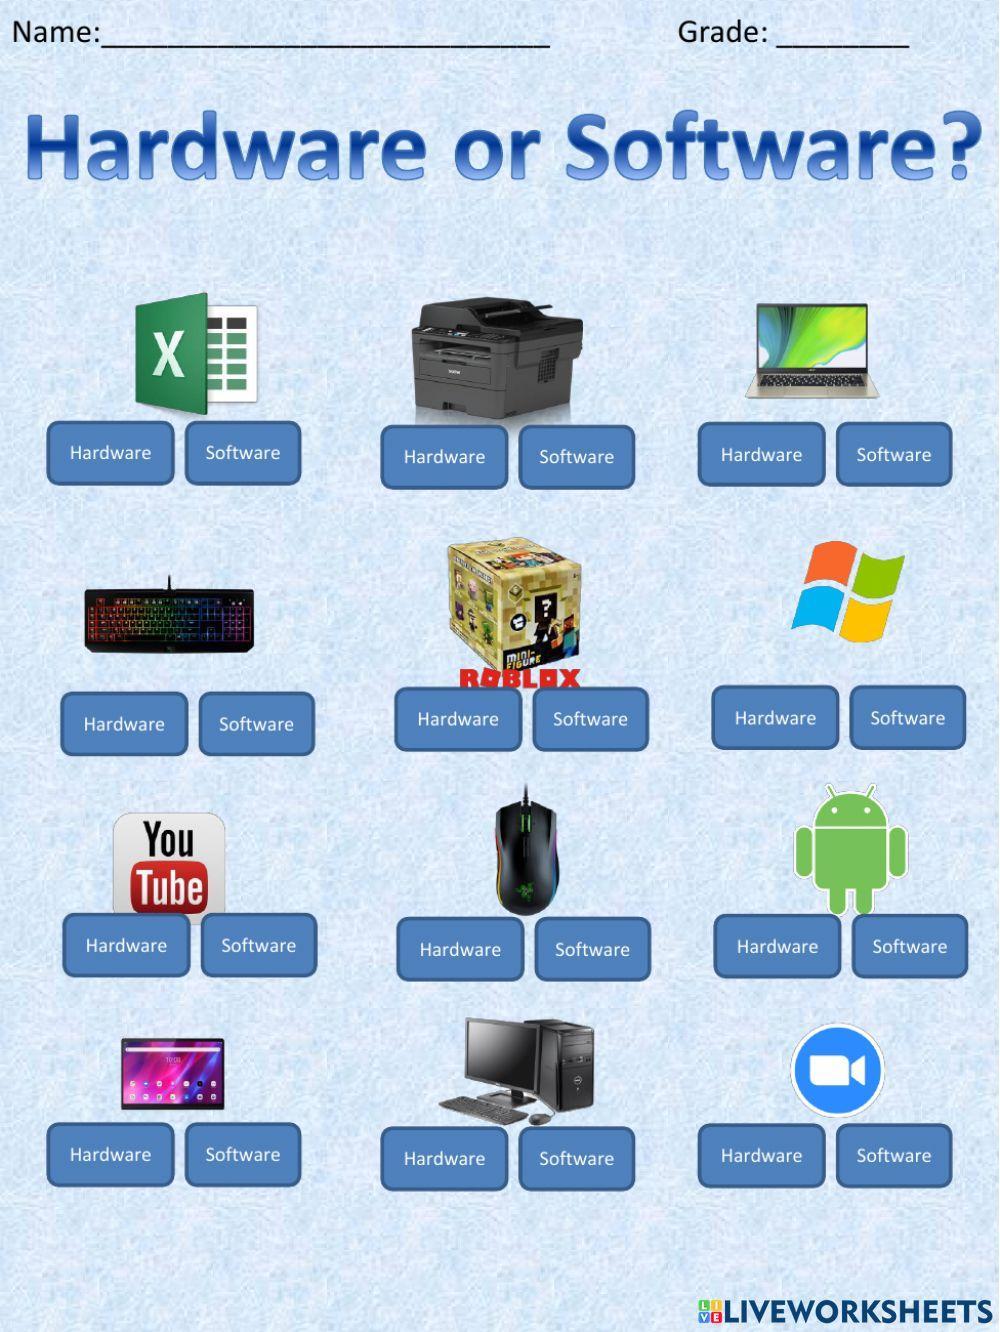 Hardware or Software?